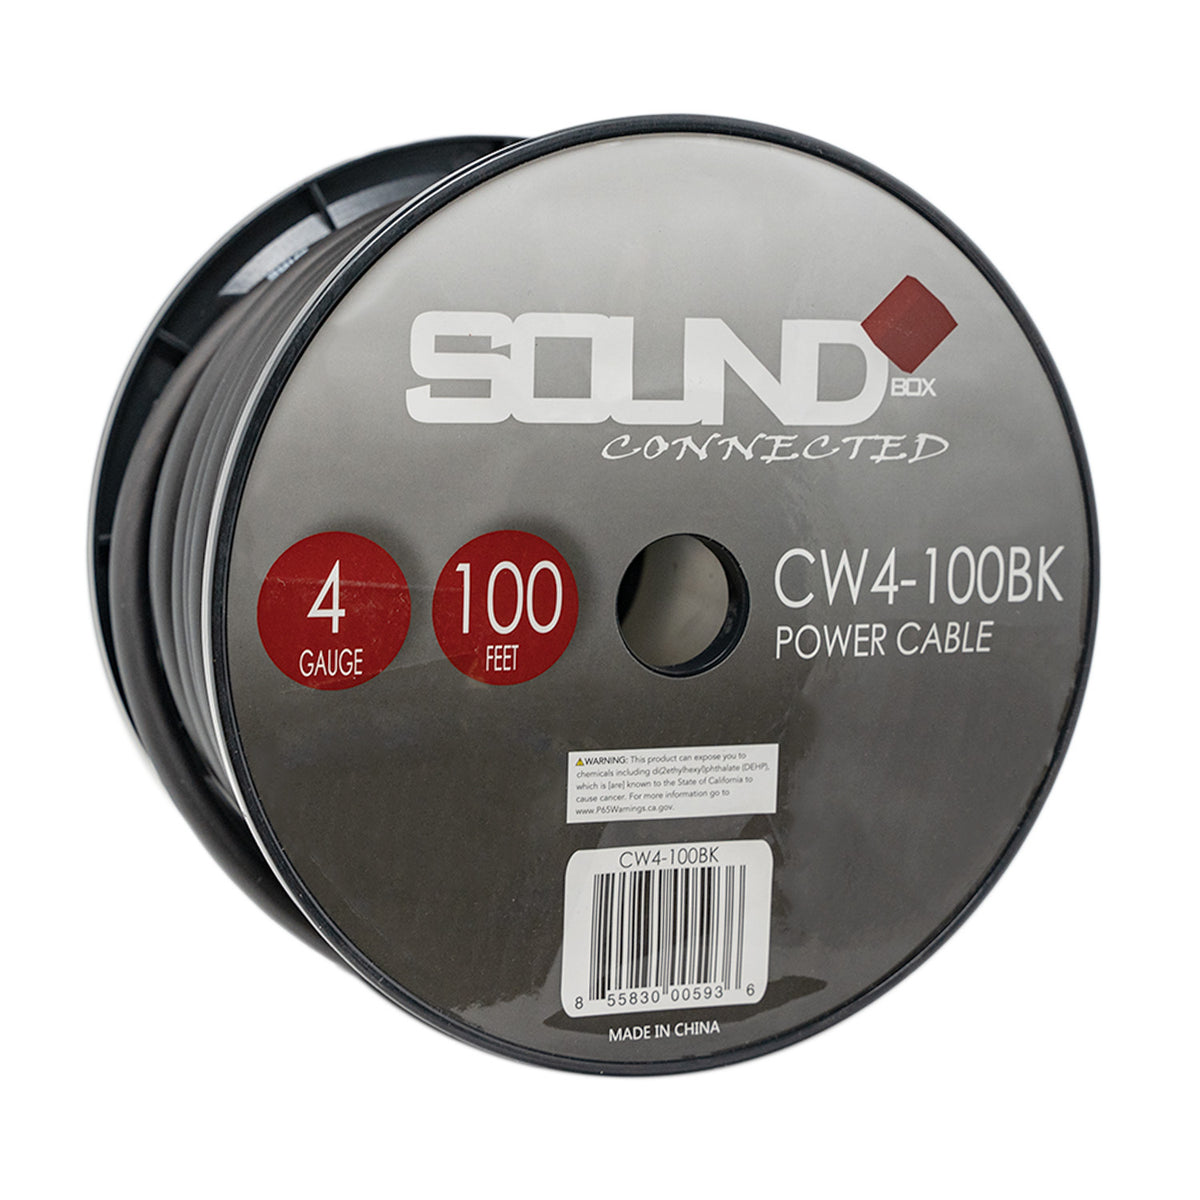 Connected 4 Gauge CCA Power Wire 100' Spool- Black